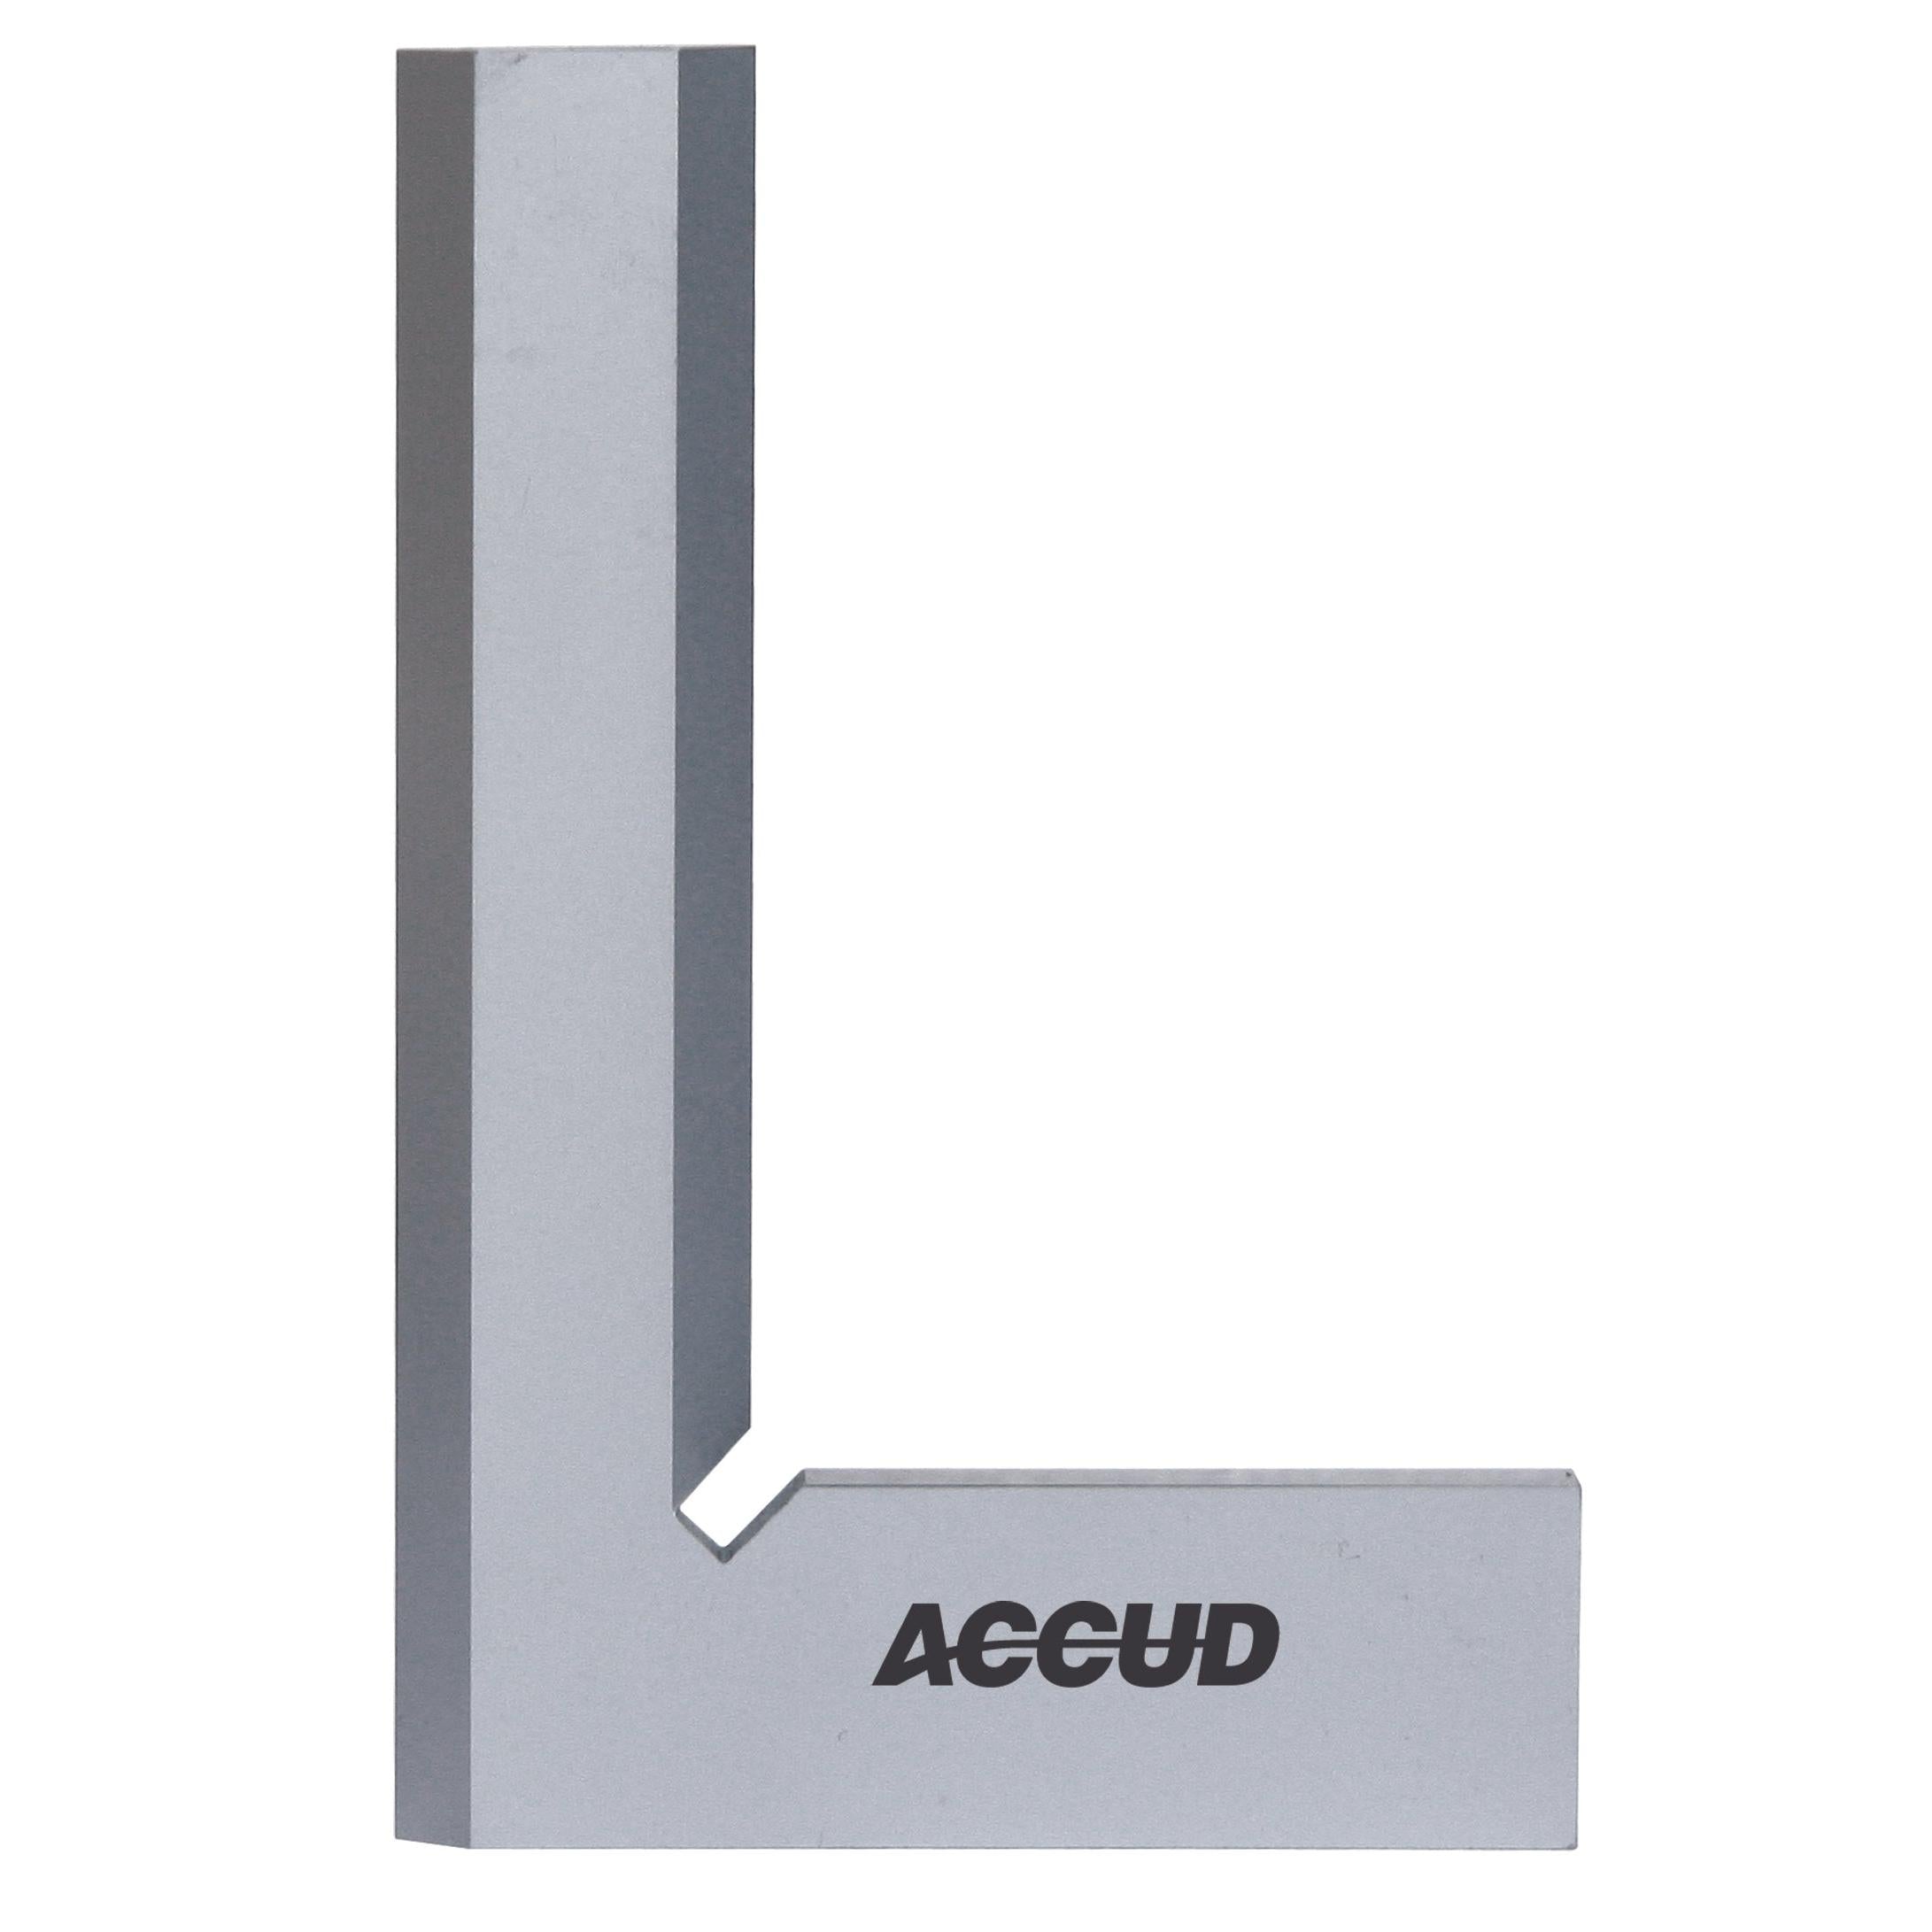 ACCUD | Beveled Edge Square 100X70Mm | 832-004-10 Power Tool Services